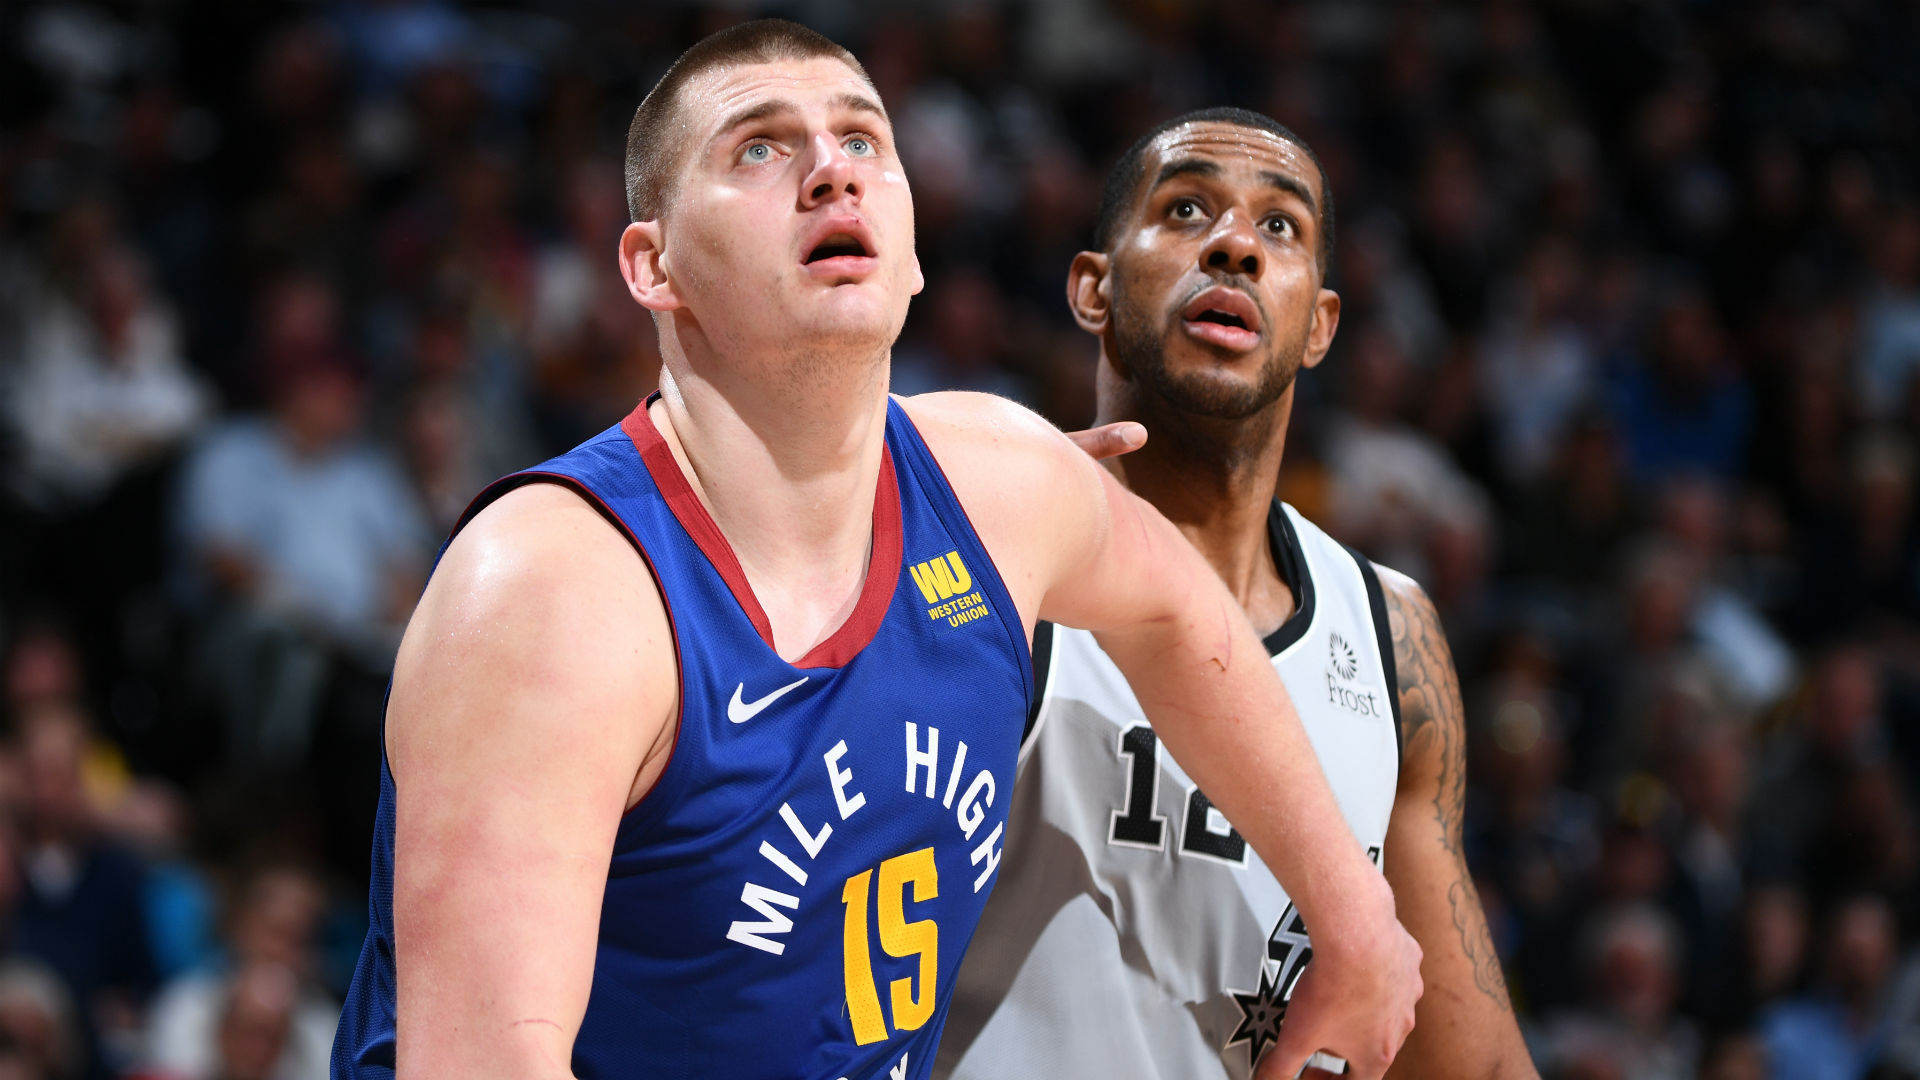 NBA Playoffs 2019: What to watch for in Game 6 between the Nuggets and Spurs | NBA.com ...1920 x 1080